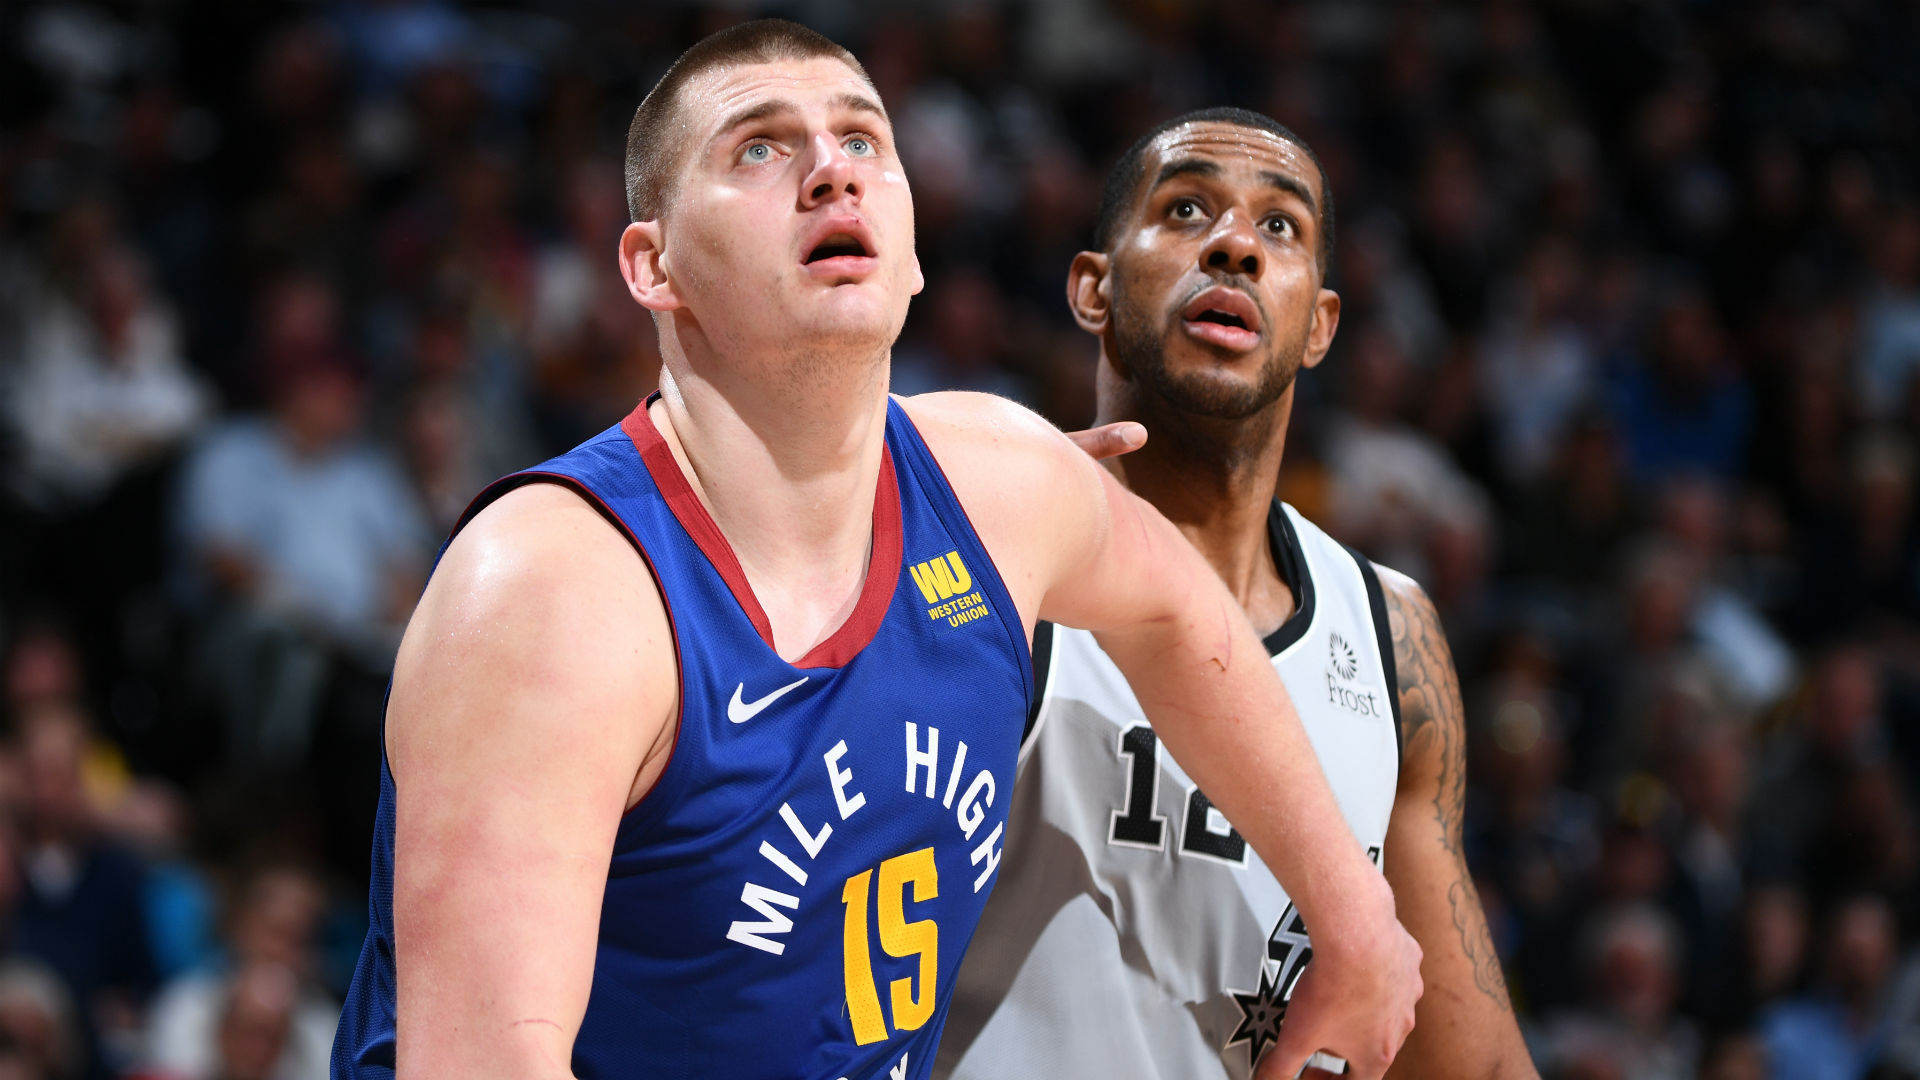 NBA Playoffs 2019: What to watch for in Game 6 between the Nuggets and Spurs | NBA.com ...1920 x 1080